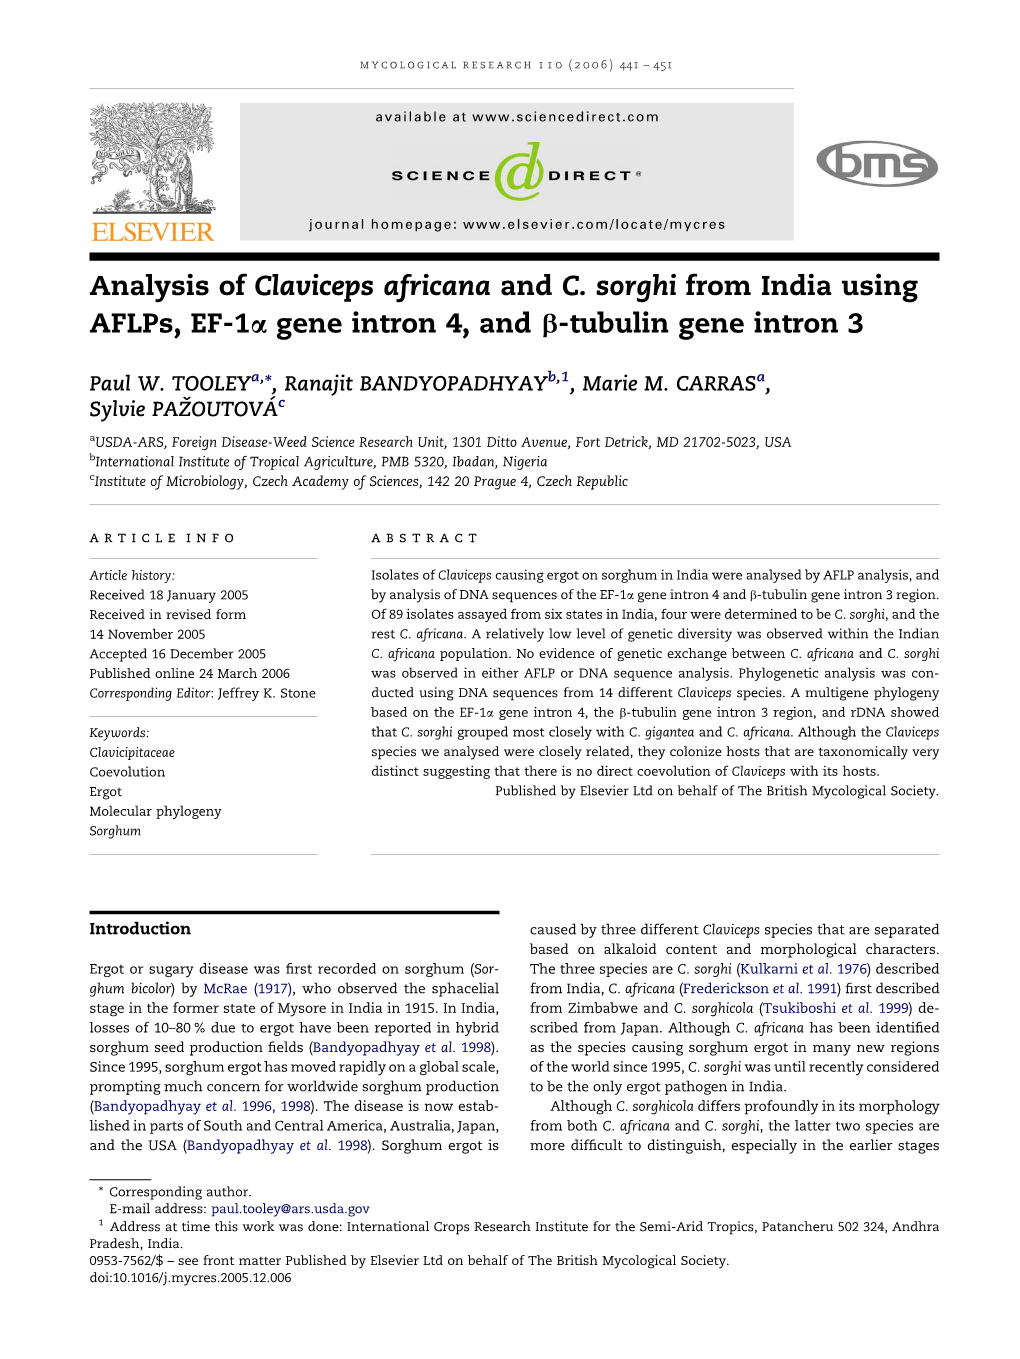 Analysis of Claviceps Africana and C. Sorghi from India Using Aflps, EF-1A Gene Intron 4, and B-Tubulin Gene Intron 3